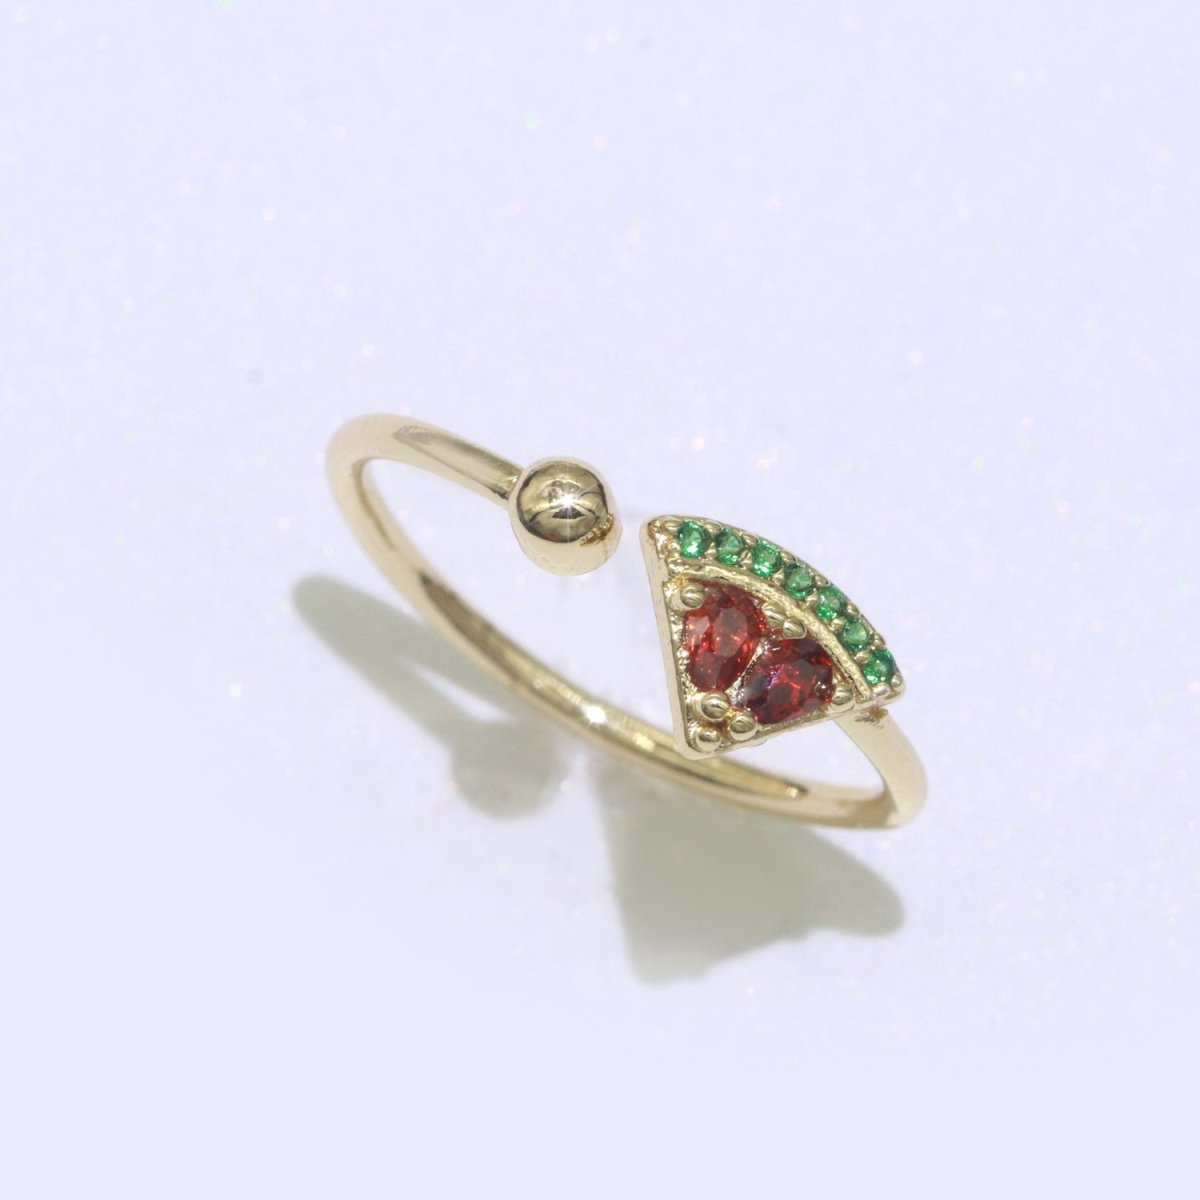 Dainty Watermelon ring, Gold Mini Fruit Ring, Dainty Stackable Rings, Open Adjustable Ring Crystal Tropical Fruits Ring O-453 - DLUXCA